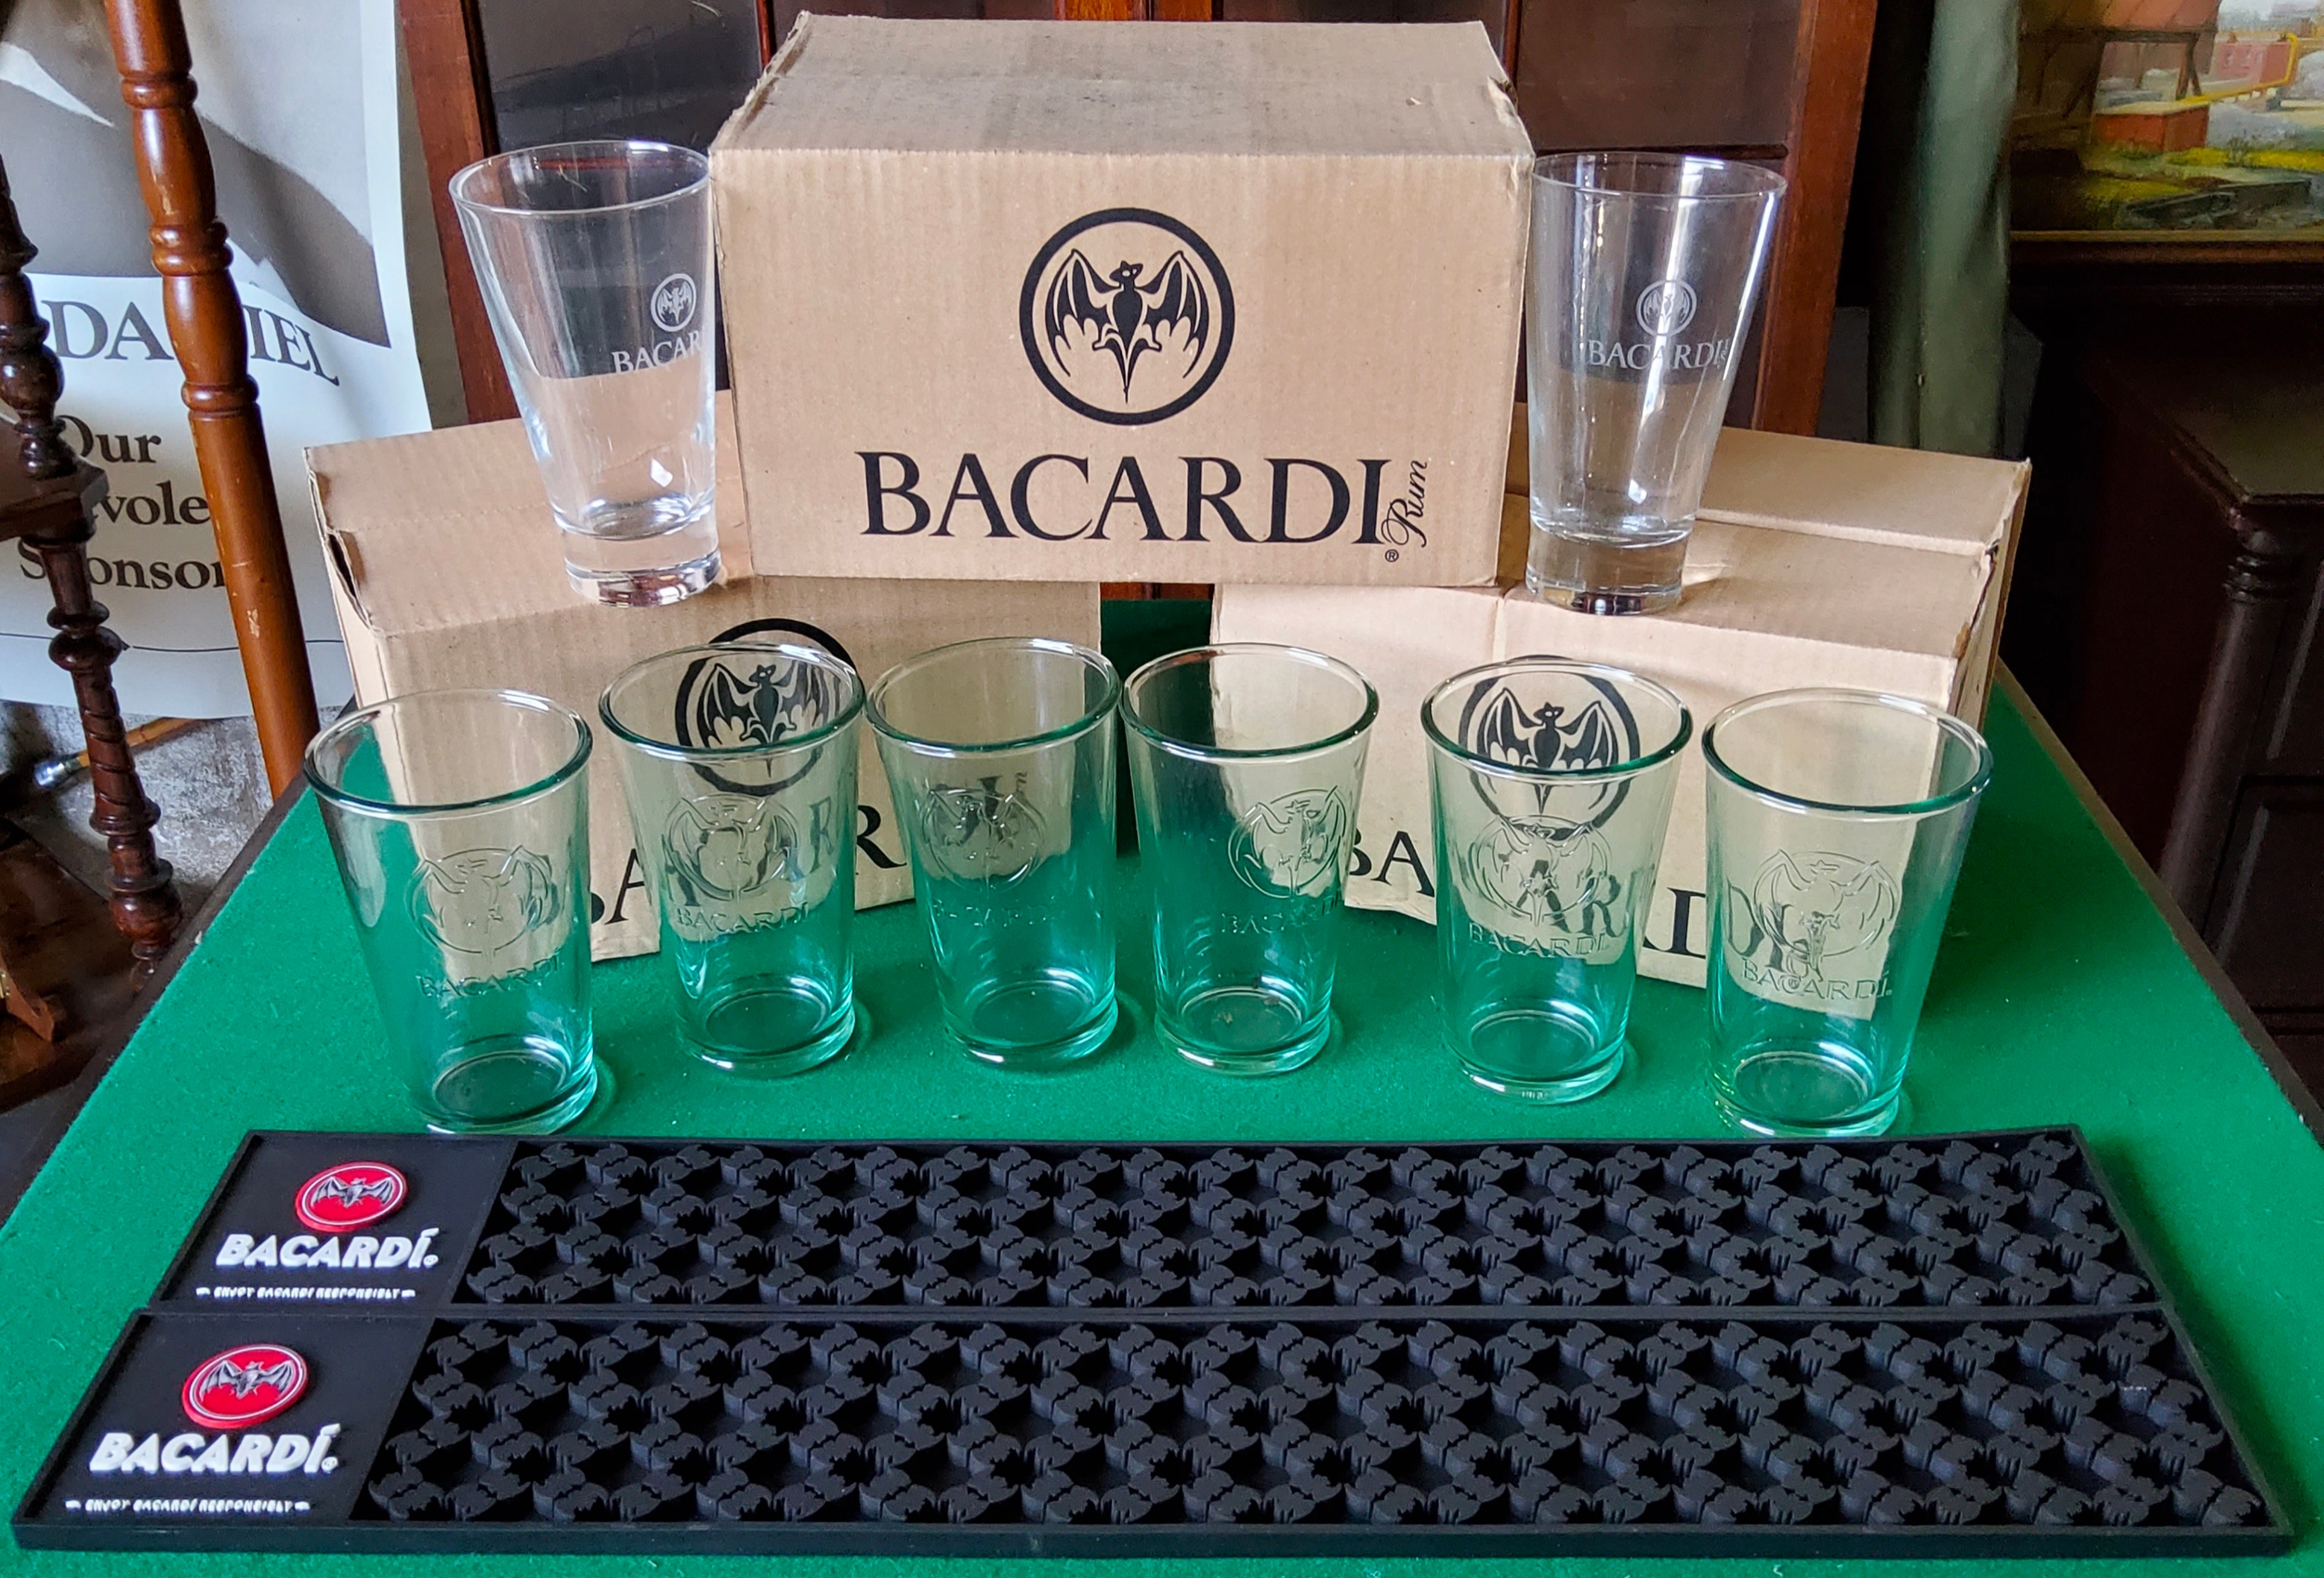 Bacardi related glasses and bar top drip mats. Excellent Condition.